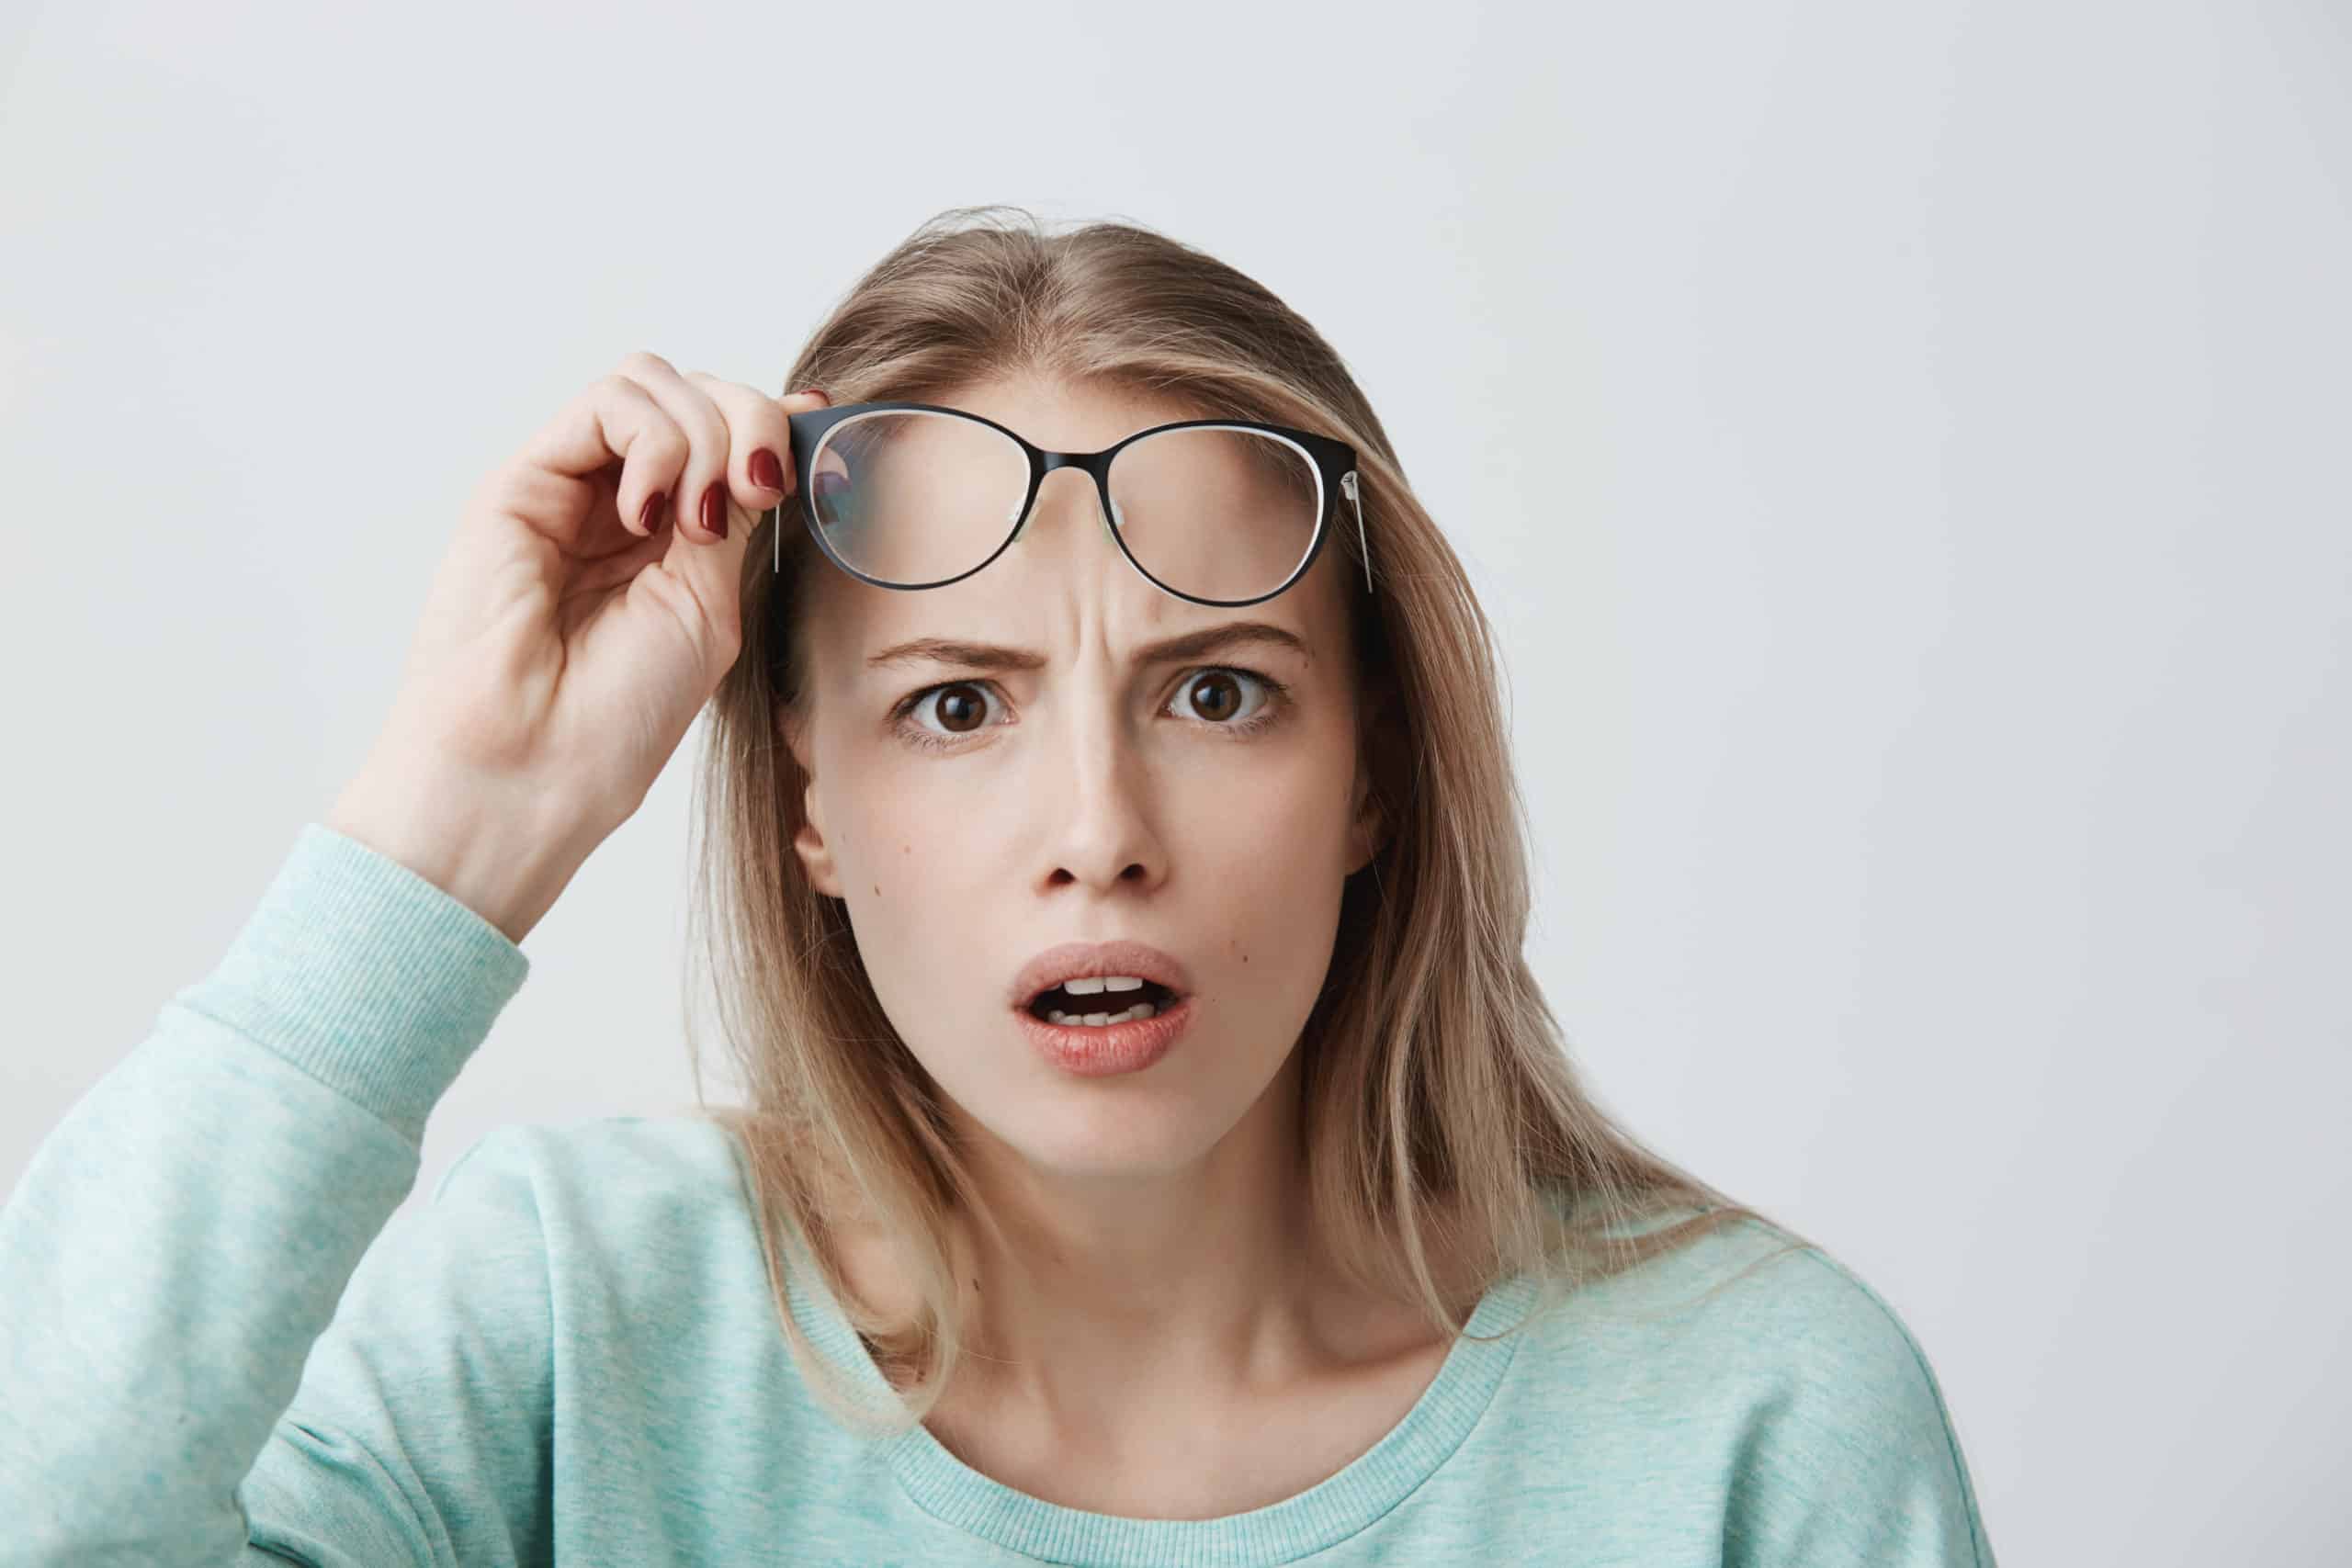 Surprised Young Female Model With Long Blonde Hair Wears Glasses